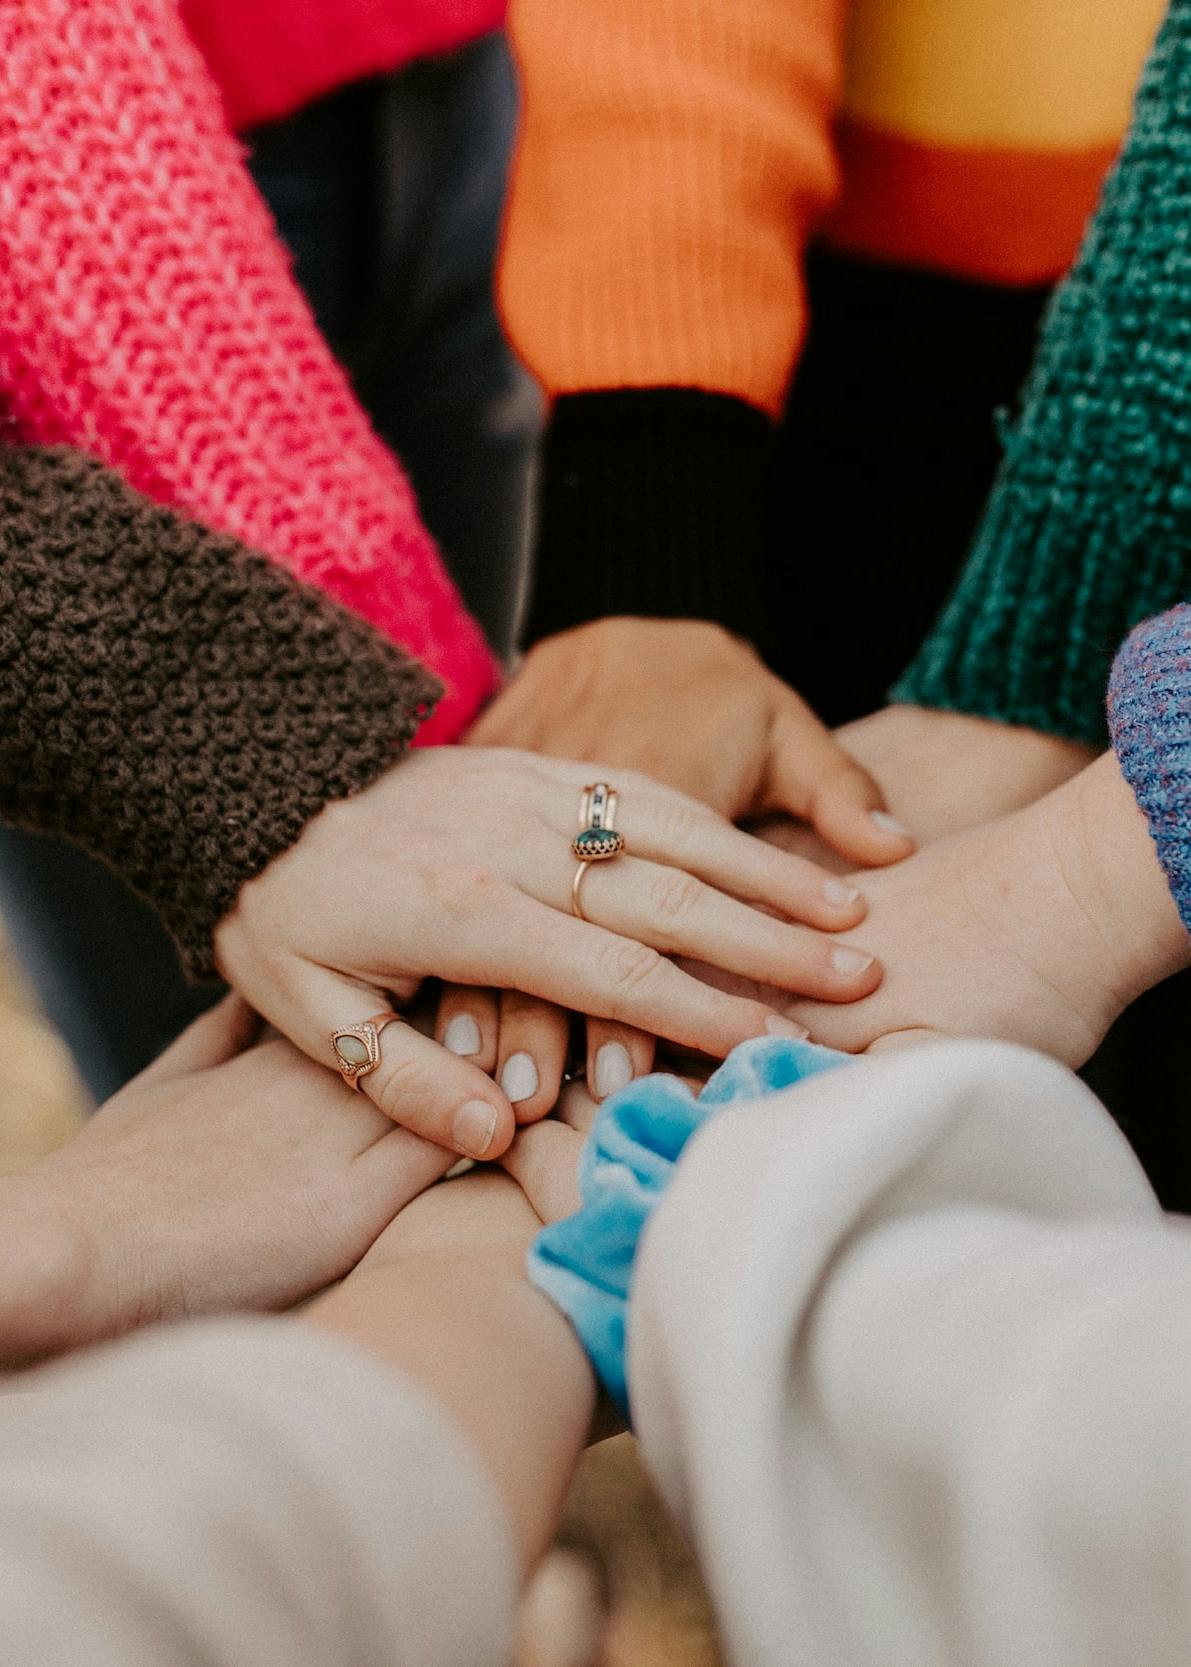 Photograph of several people's hands placed on top of each other as a sign of unity.